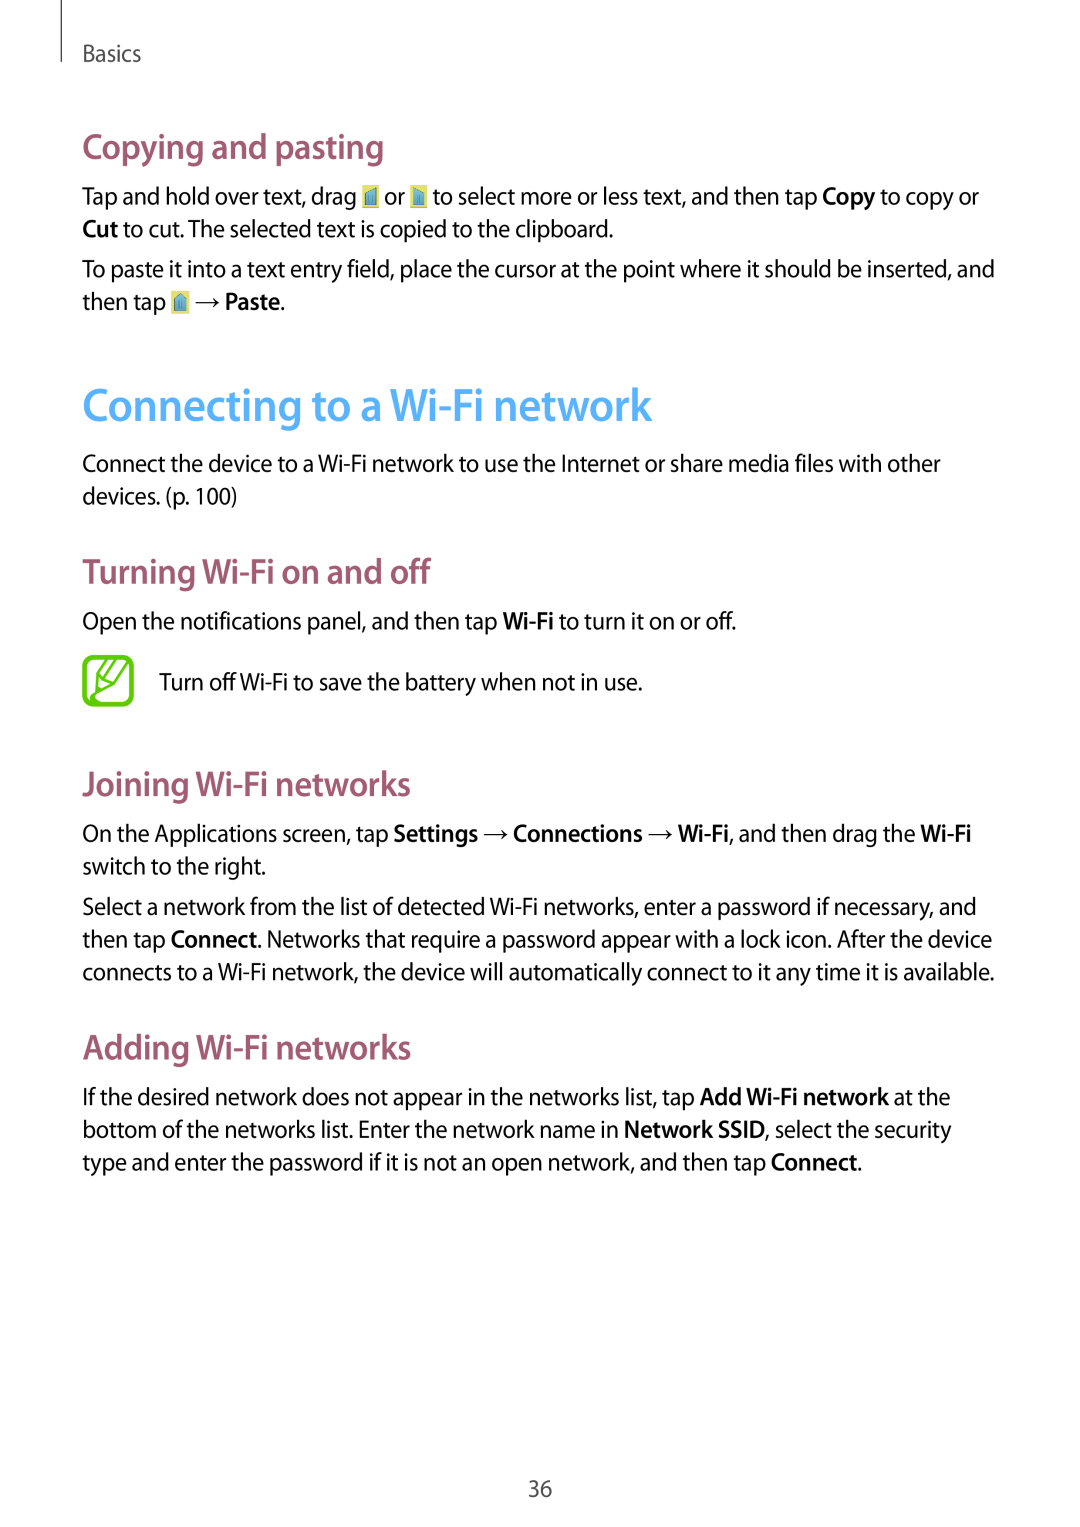 Samsung GT-I9060ZODTHR Connecting to a Wi-Fi network, Copying and pasting, Turning Wi-Fi on and off, Adding Wi-Fi networks 